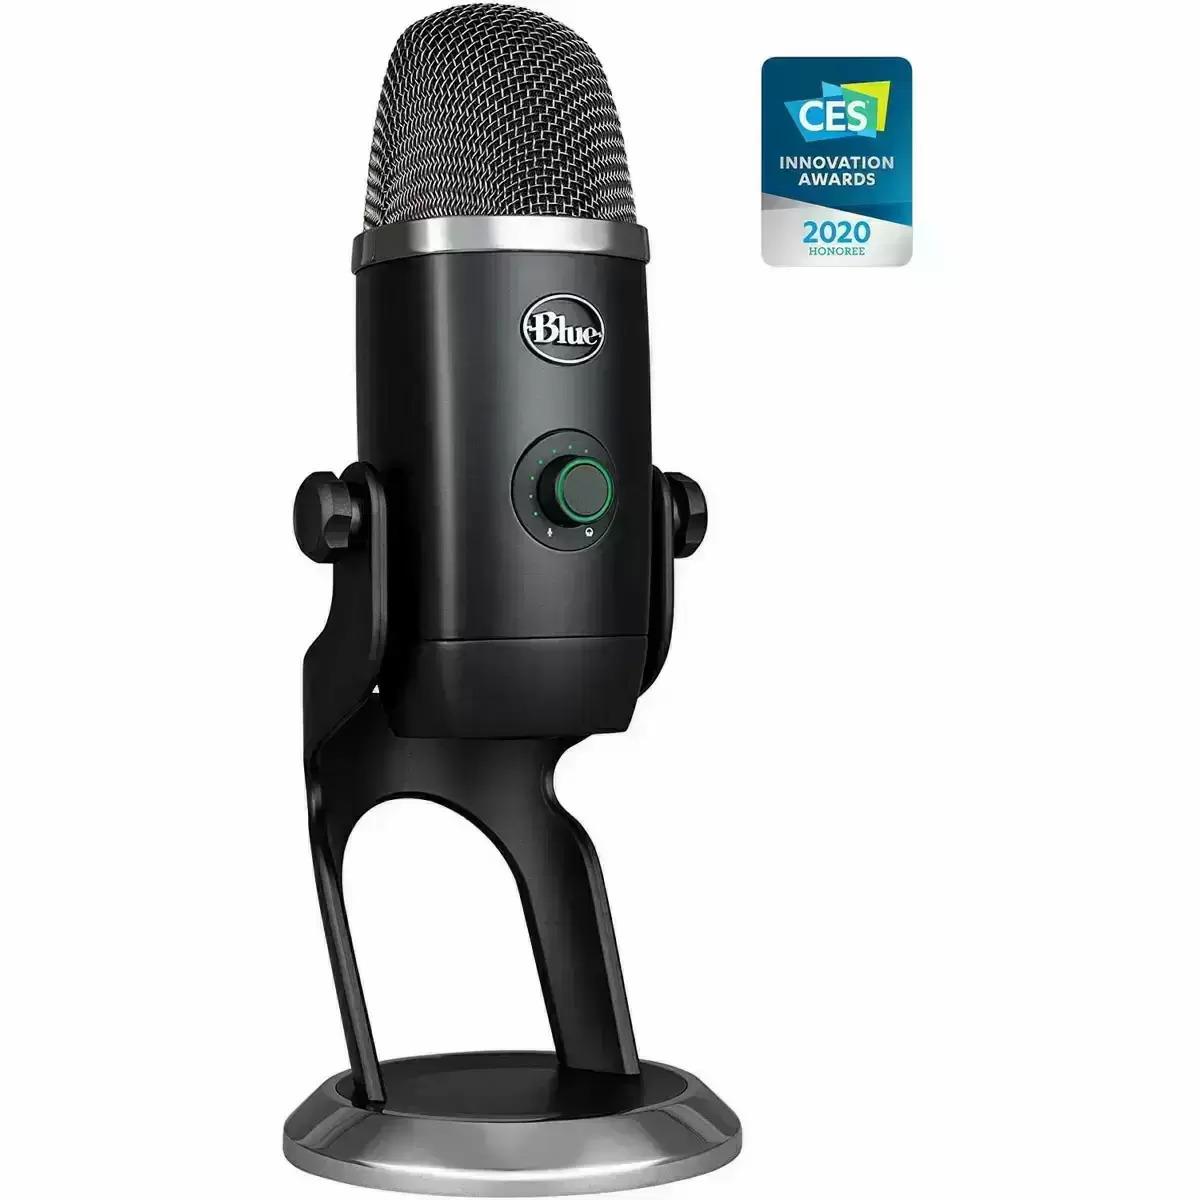 Blue Yeti X Professional Condenser USB Microphone for $139 Shipped